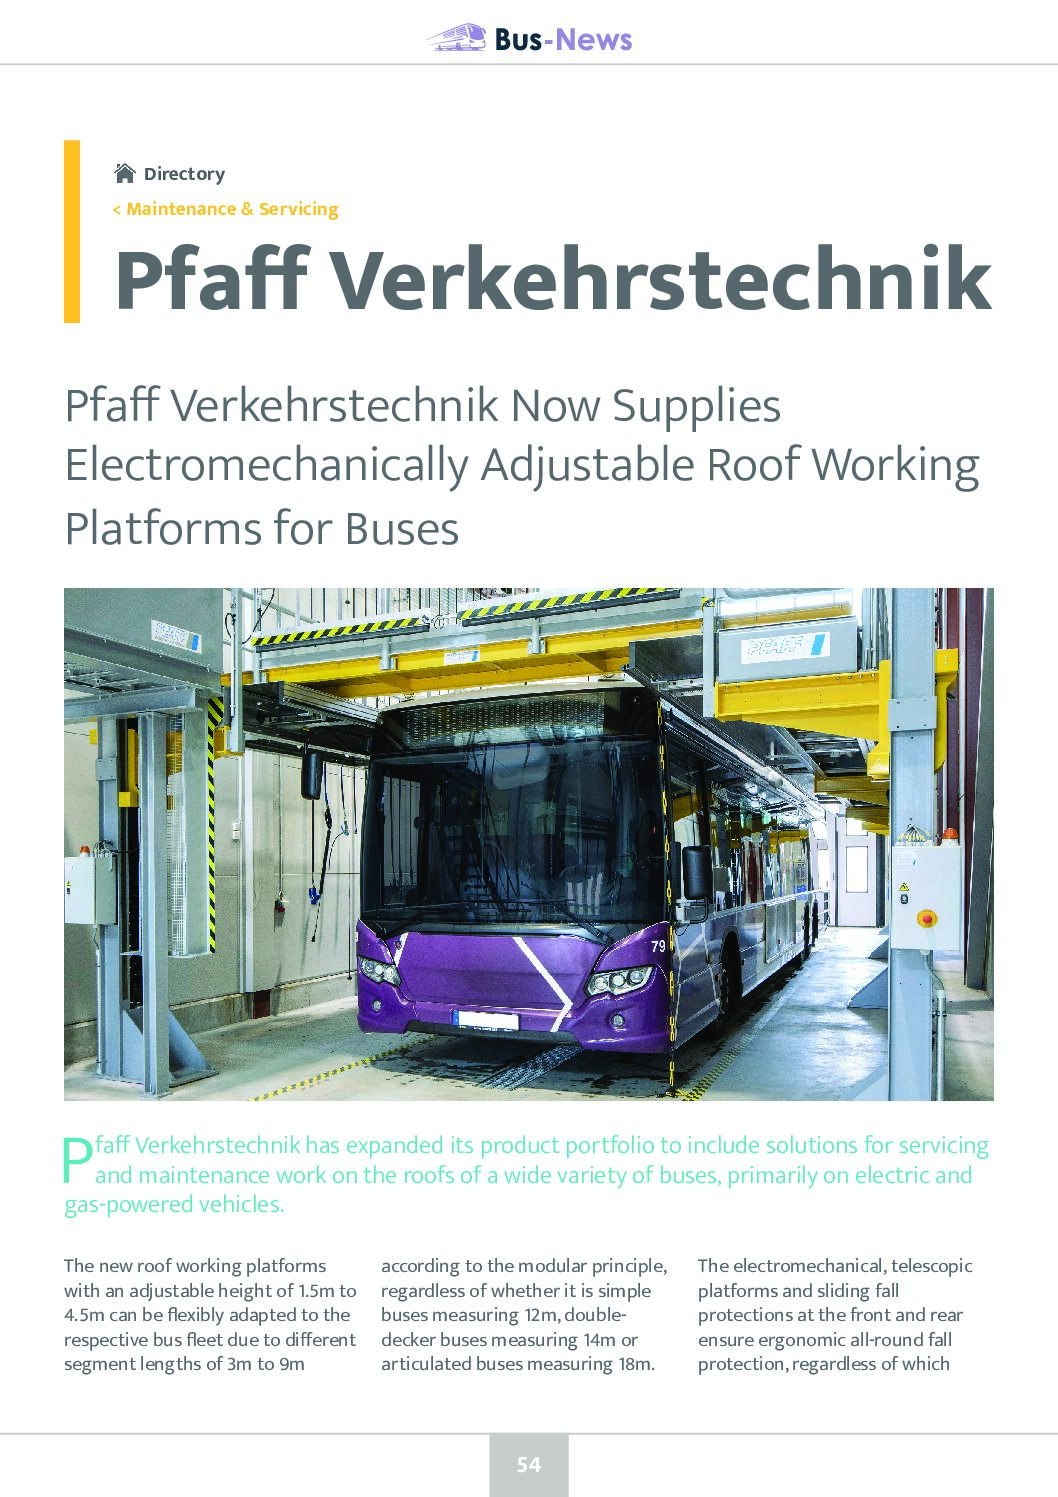 Electromechanically Adjustable Roof Working Platforms for Buses